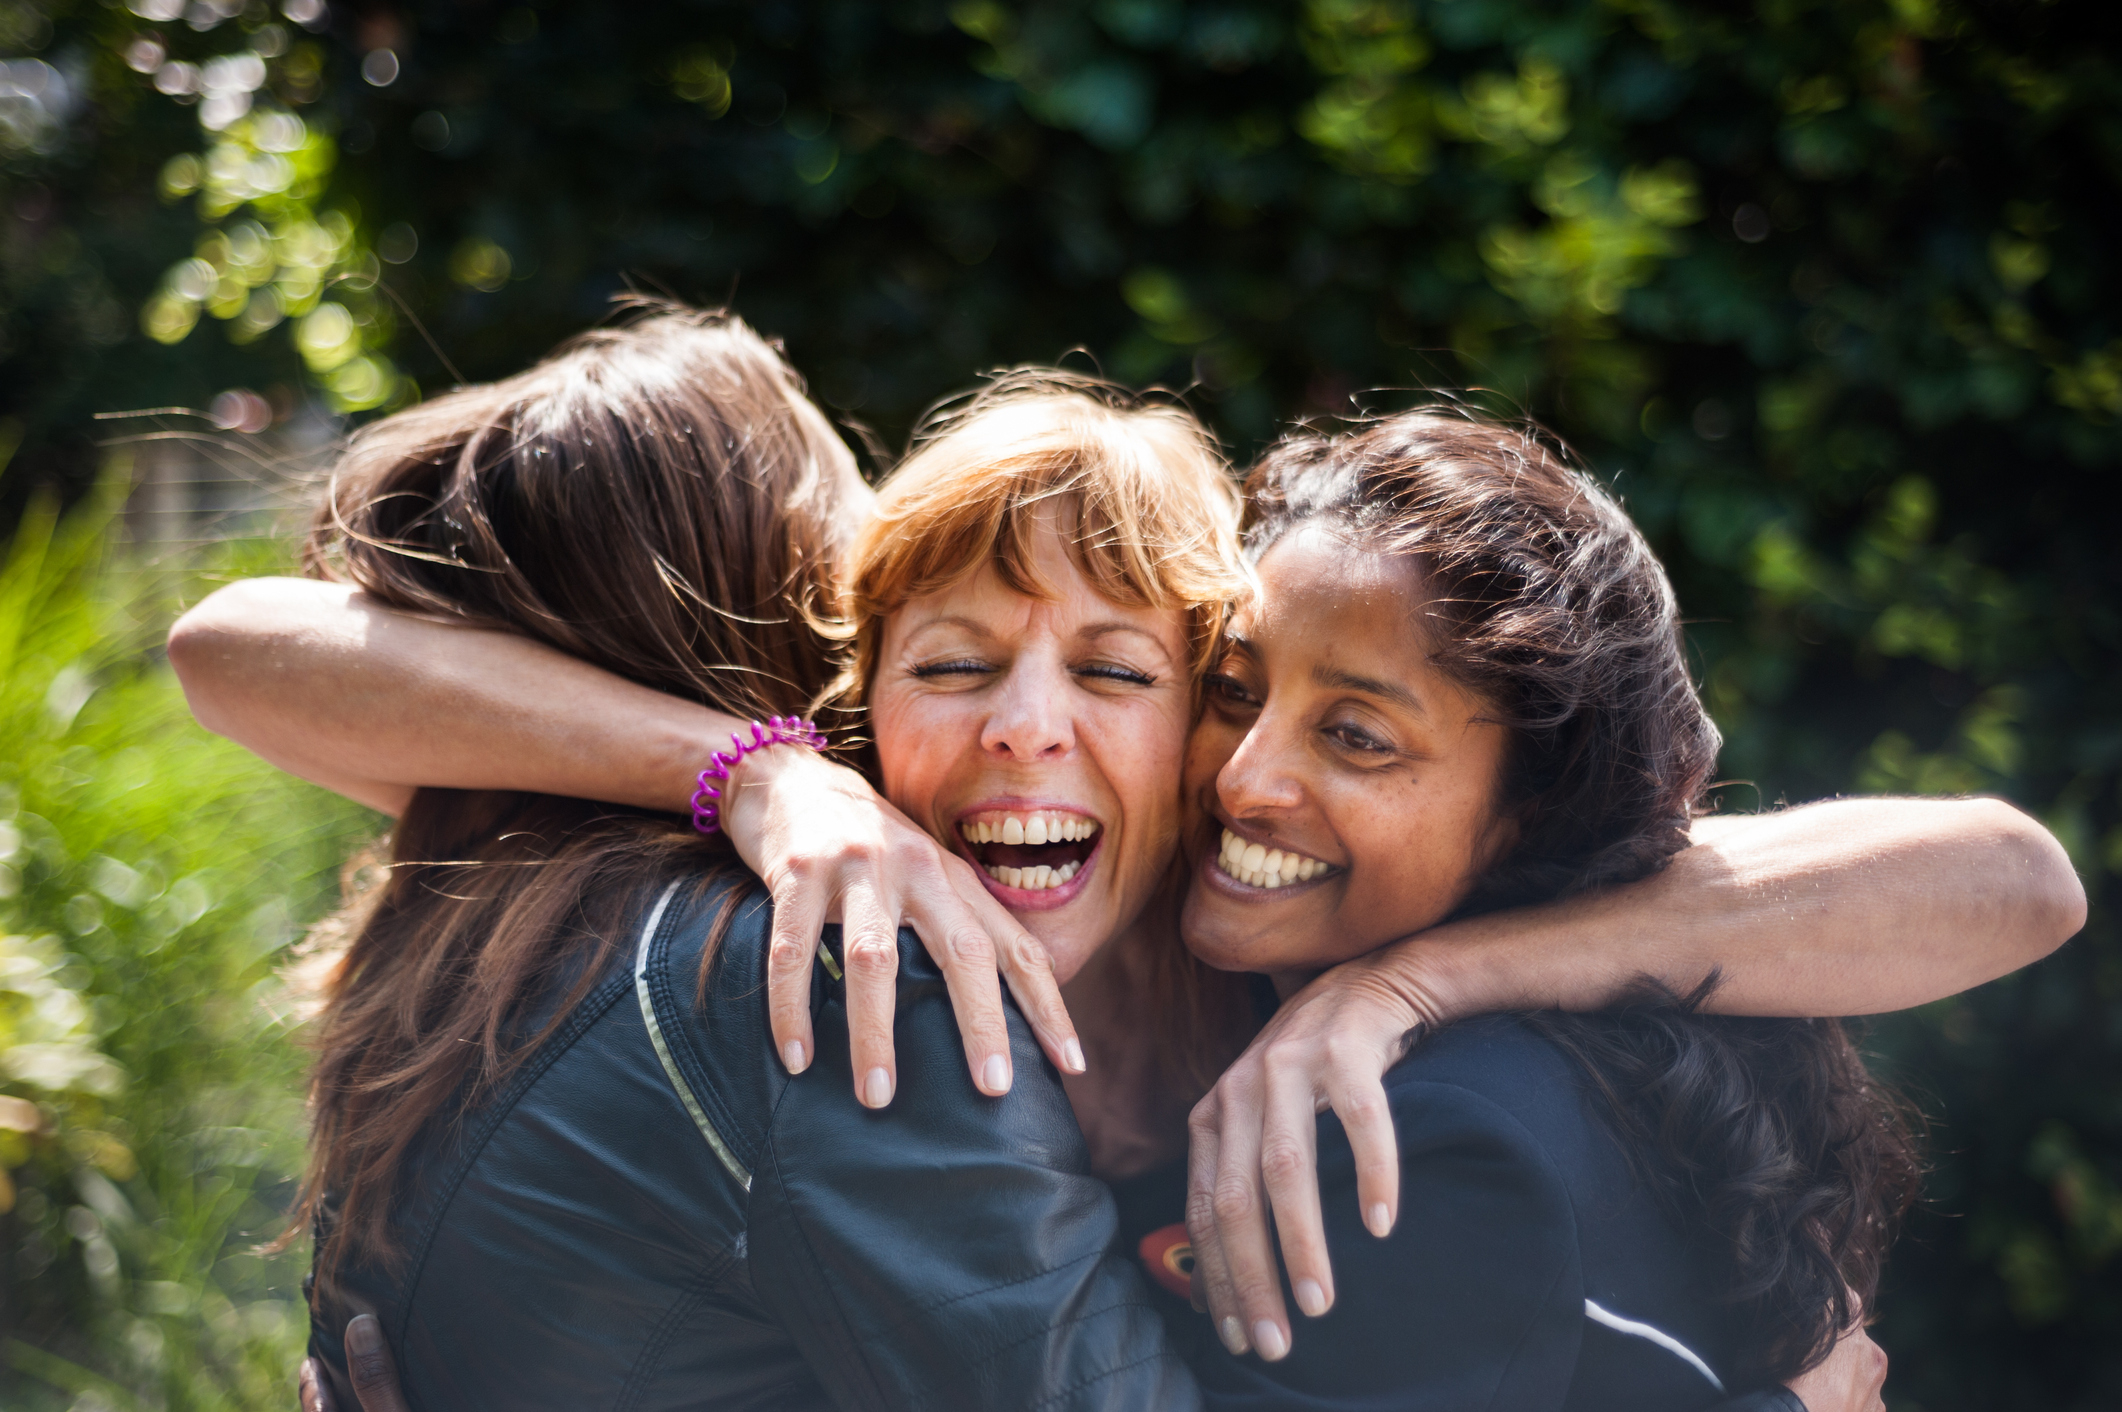 Three friends are hugging and smiling outdoors, expressing joy and affection